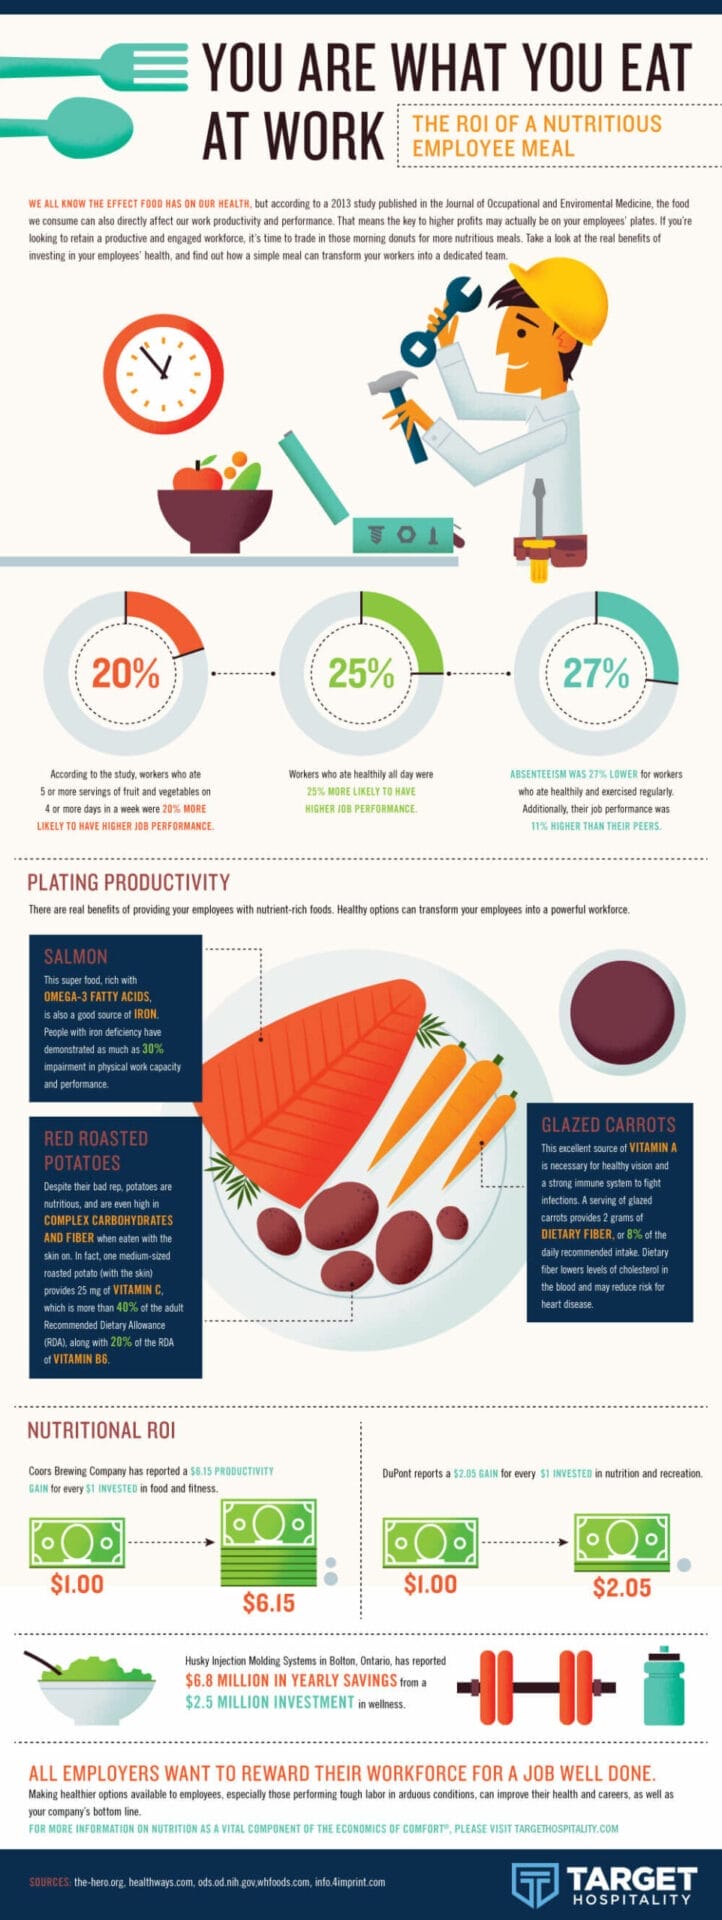 Infographic explores how you are what you eat at work.